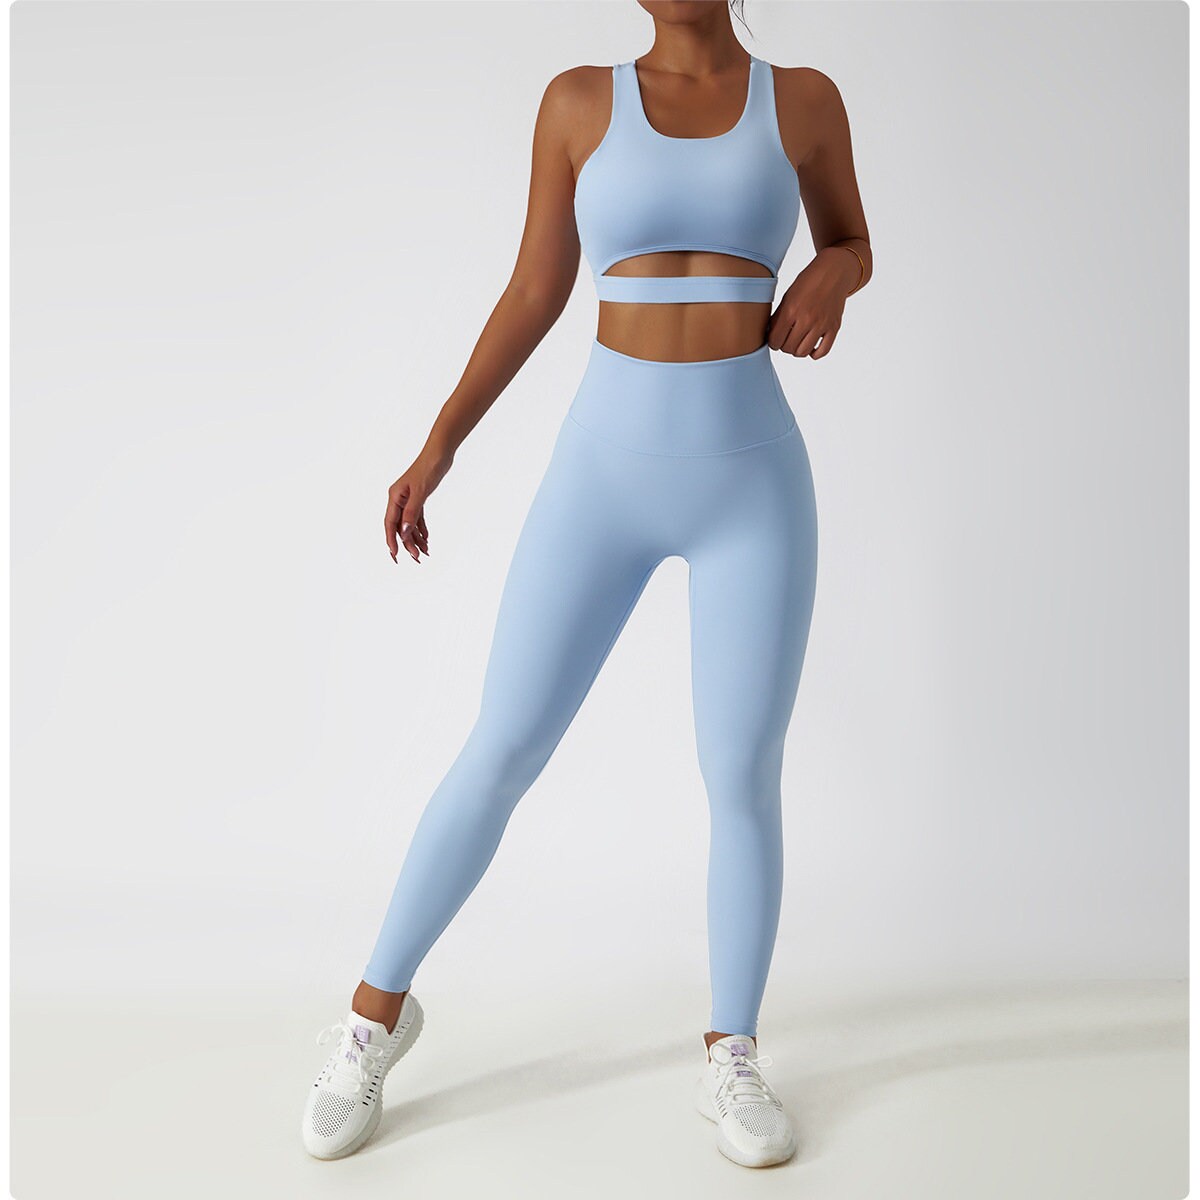 14 Workout Pants That Could Pass As Real Pants